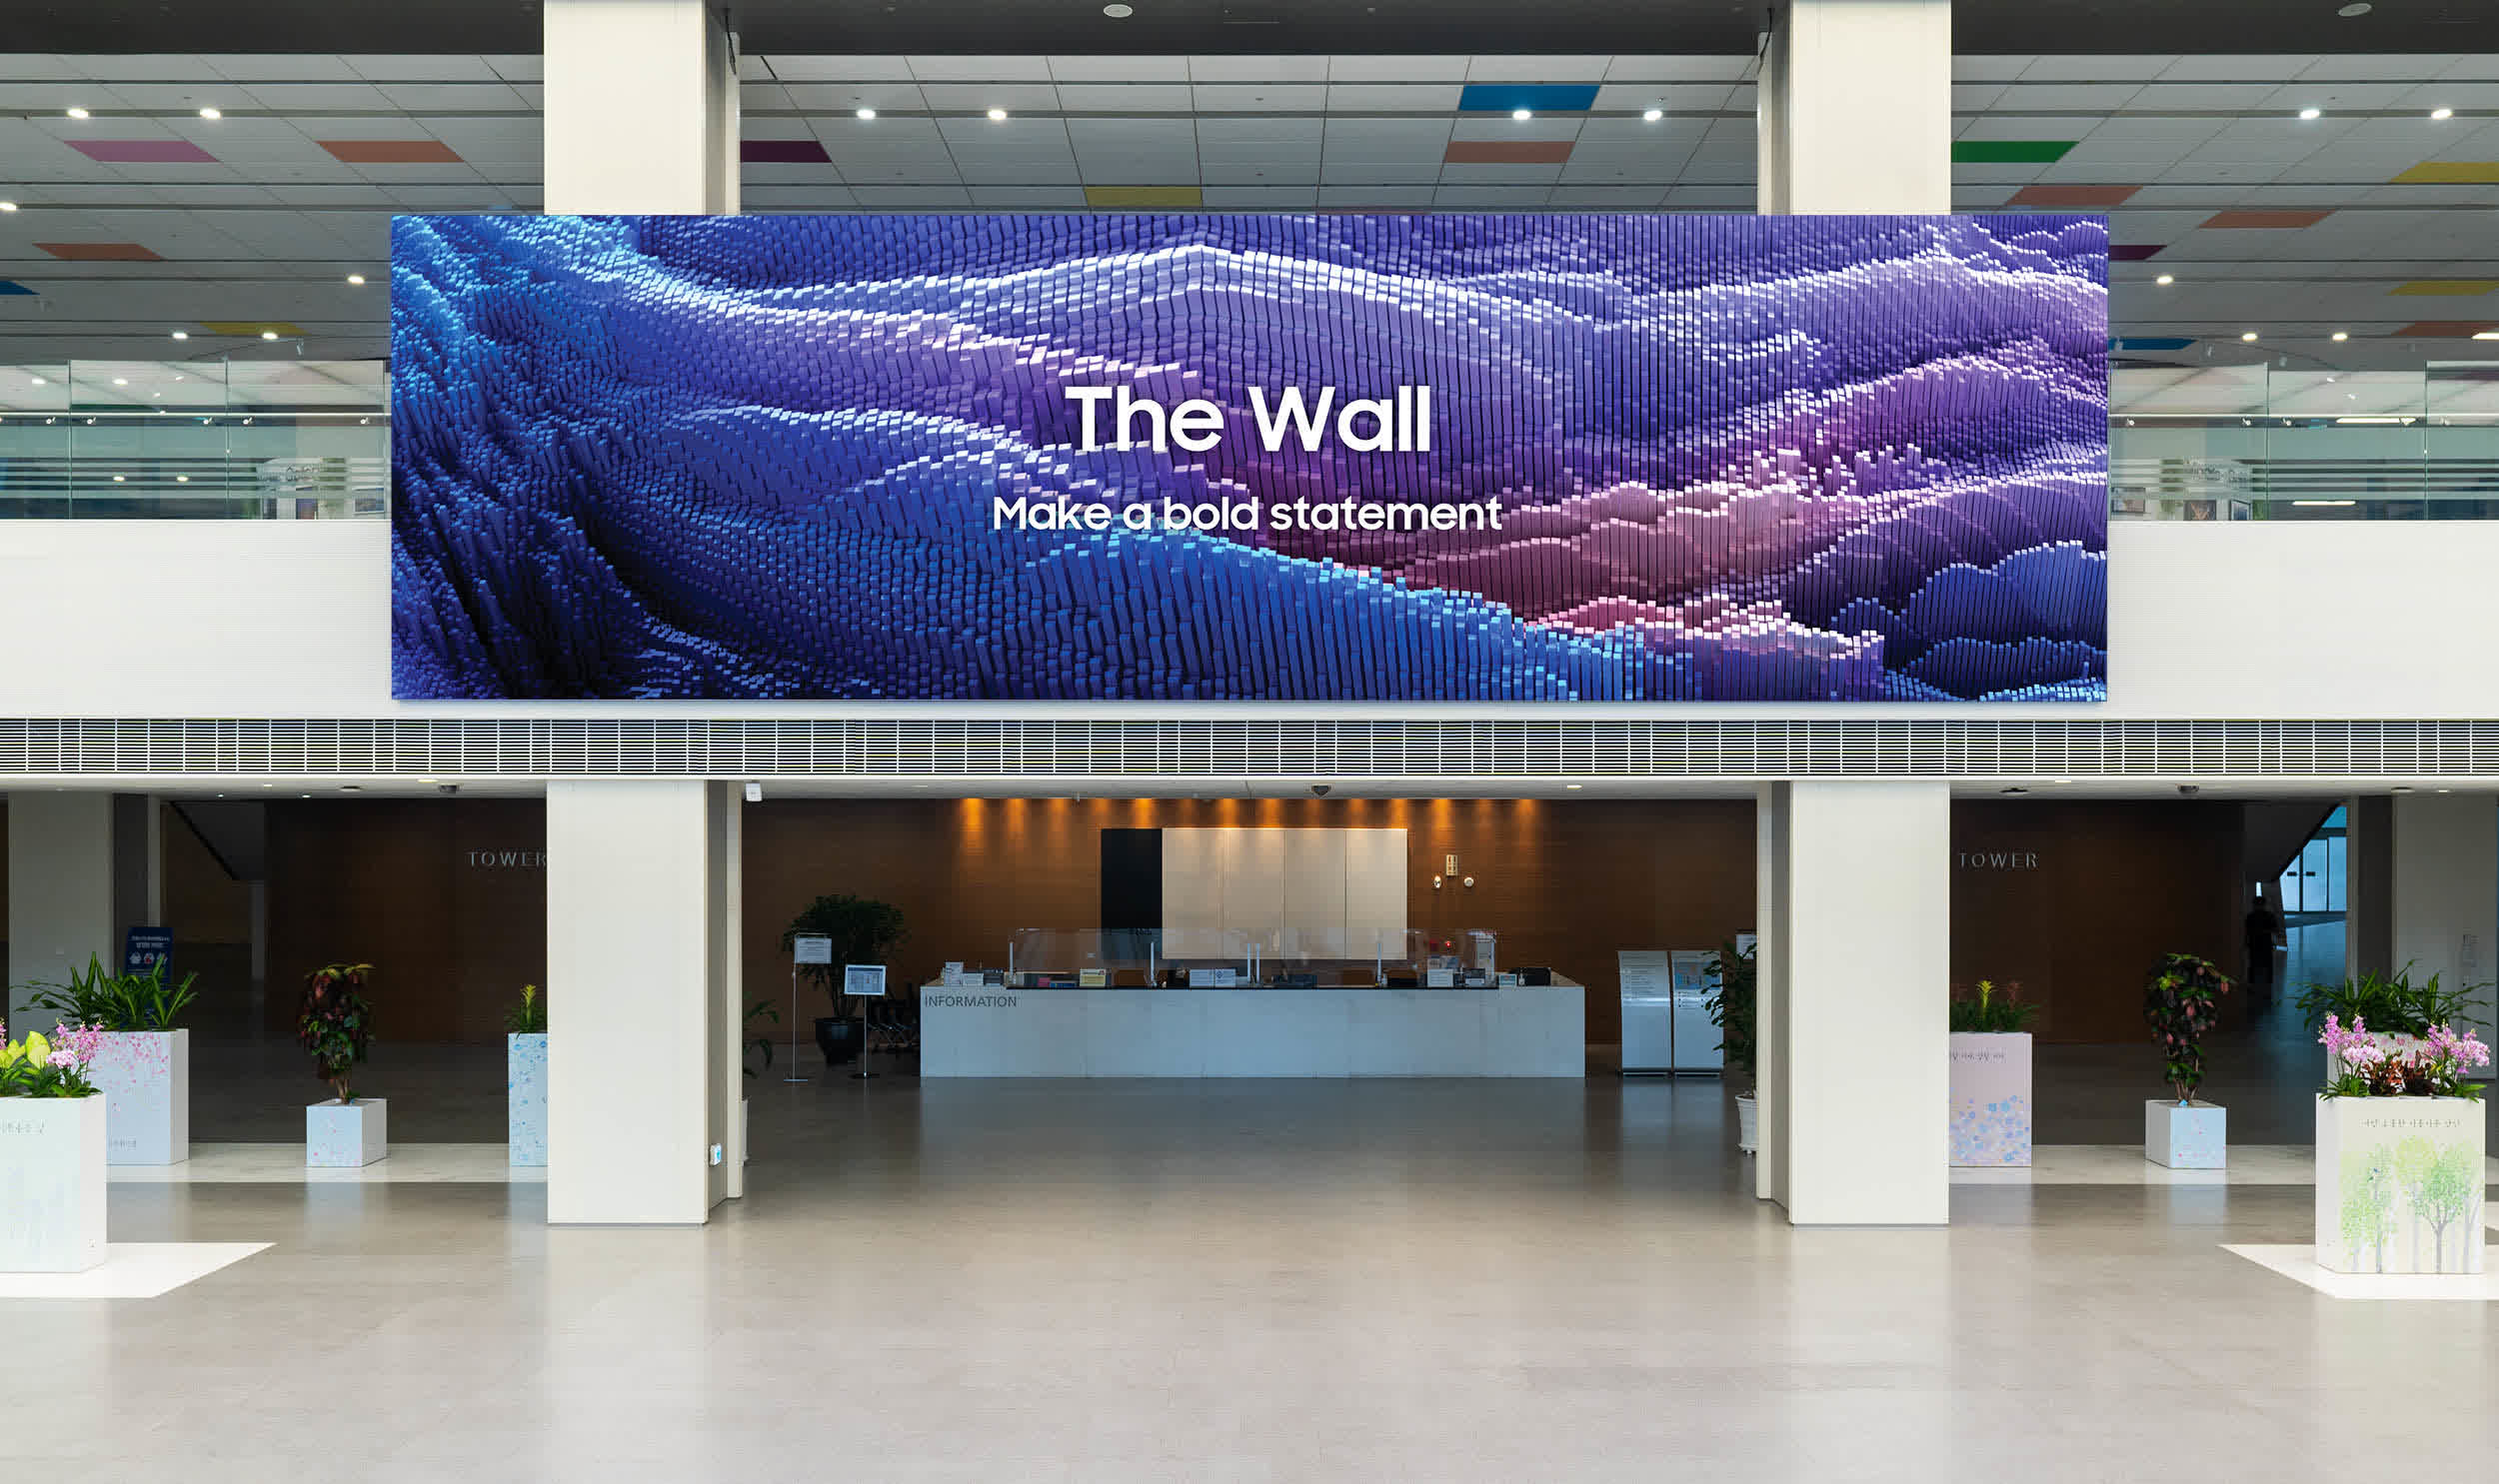 Samsung's latest The Wall TV measures over 1,000 inches diagonally